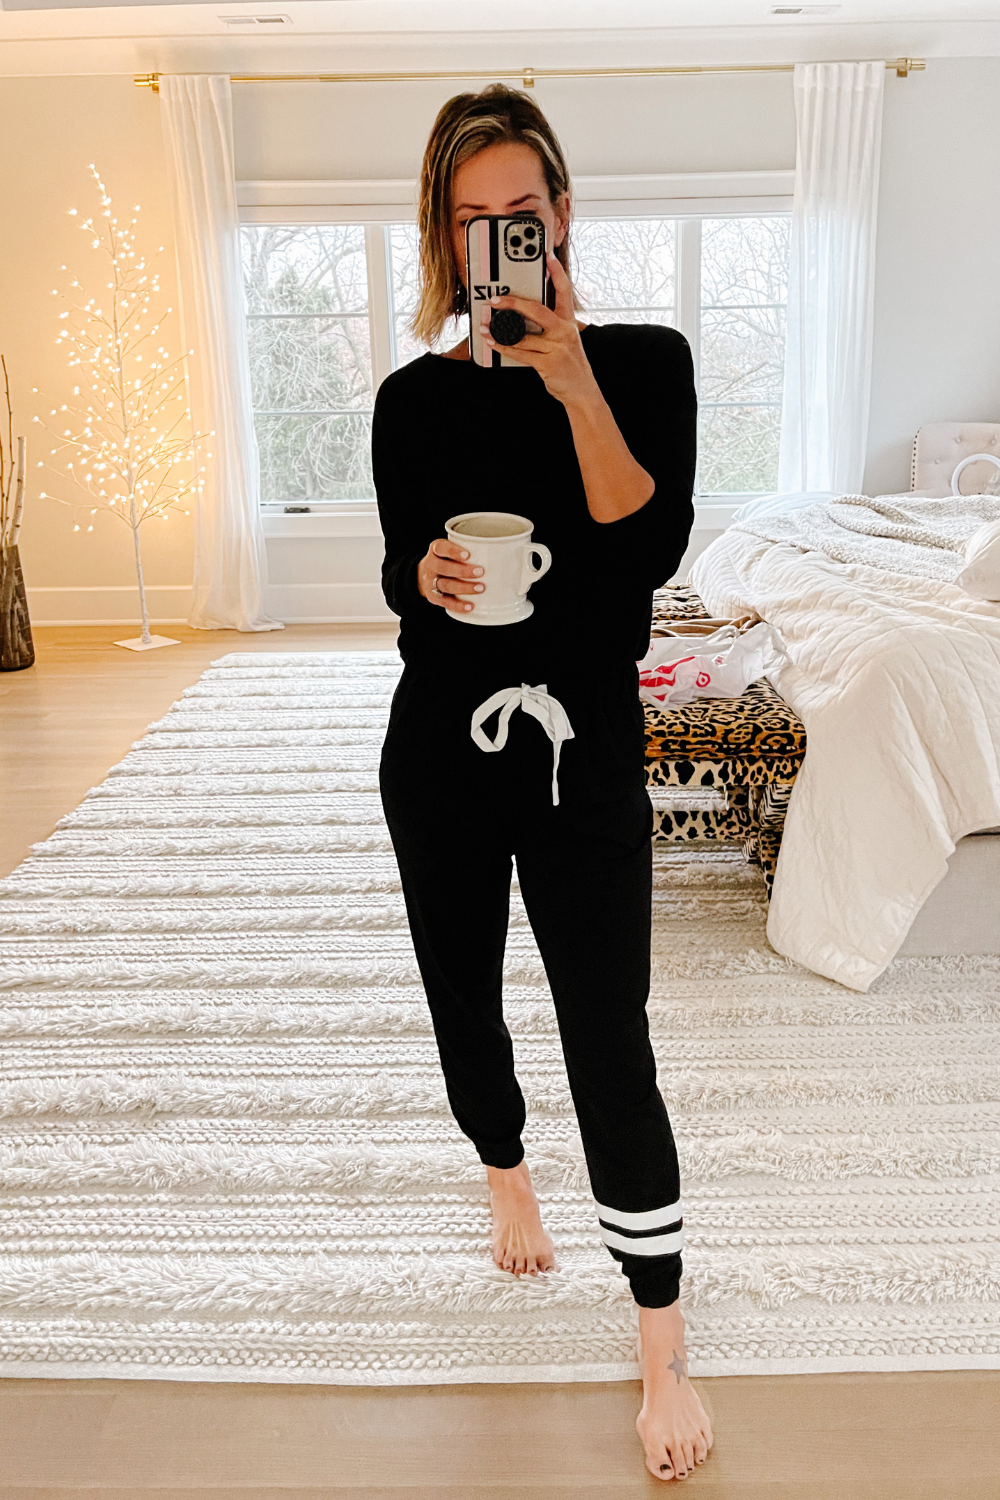 Suzanne wearing a black jogger set